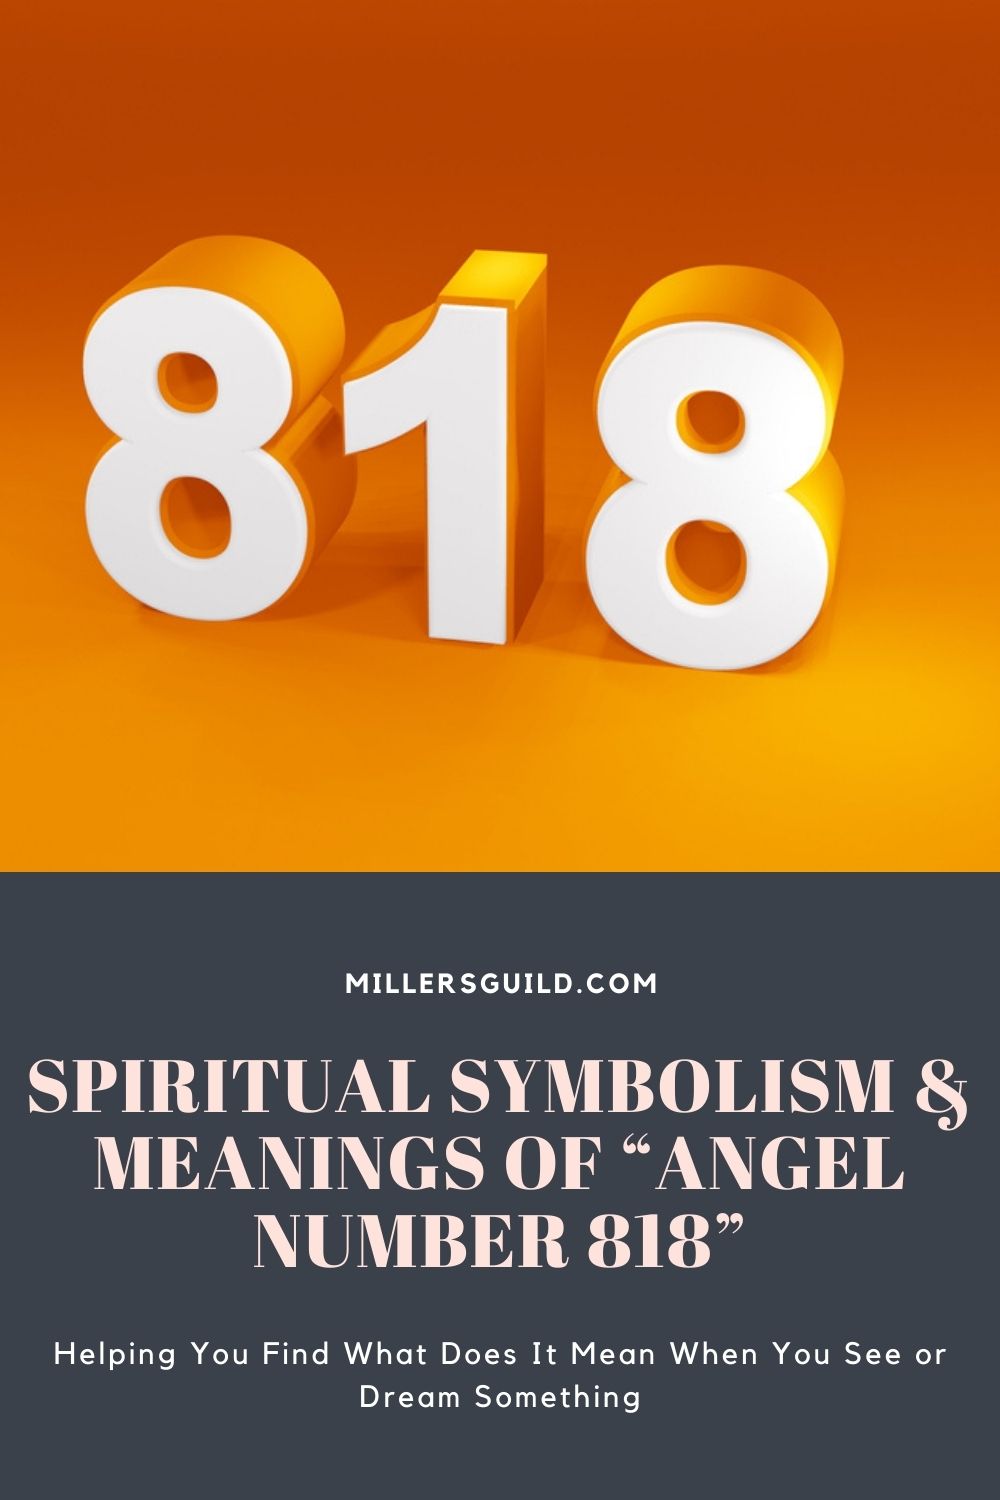 Spiritual Symbolism & Meanings of “Angel Number 818” 1